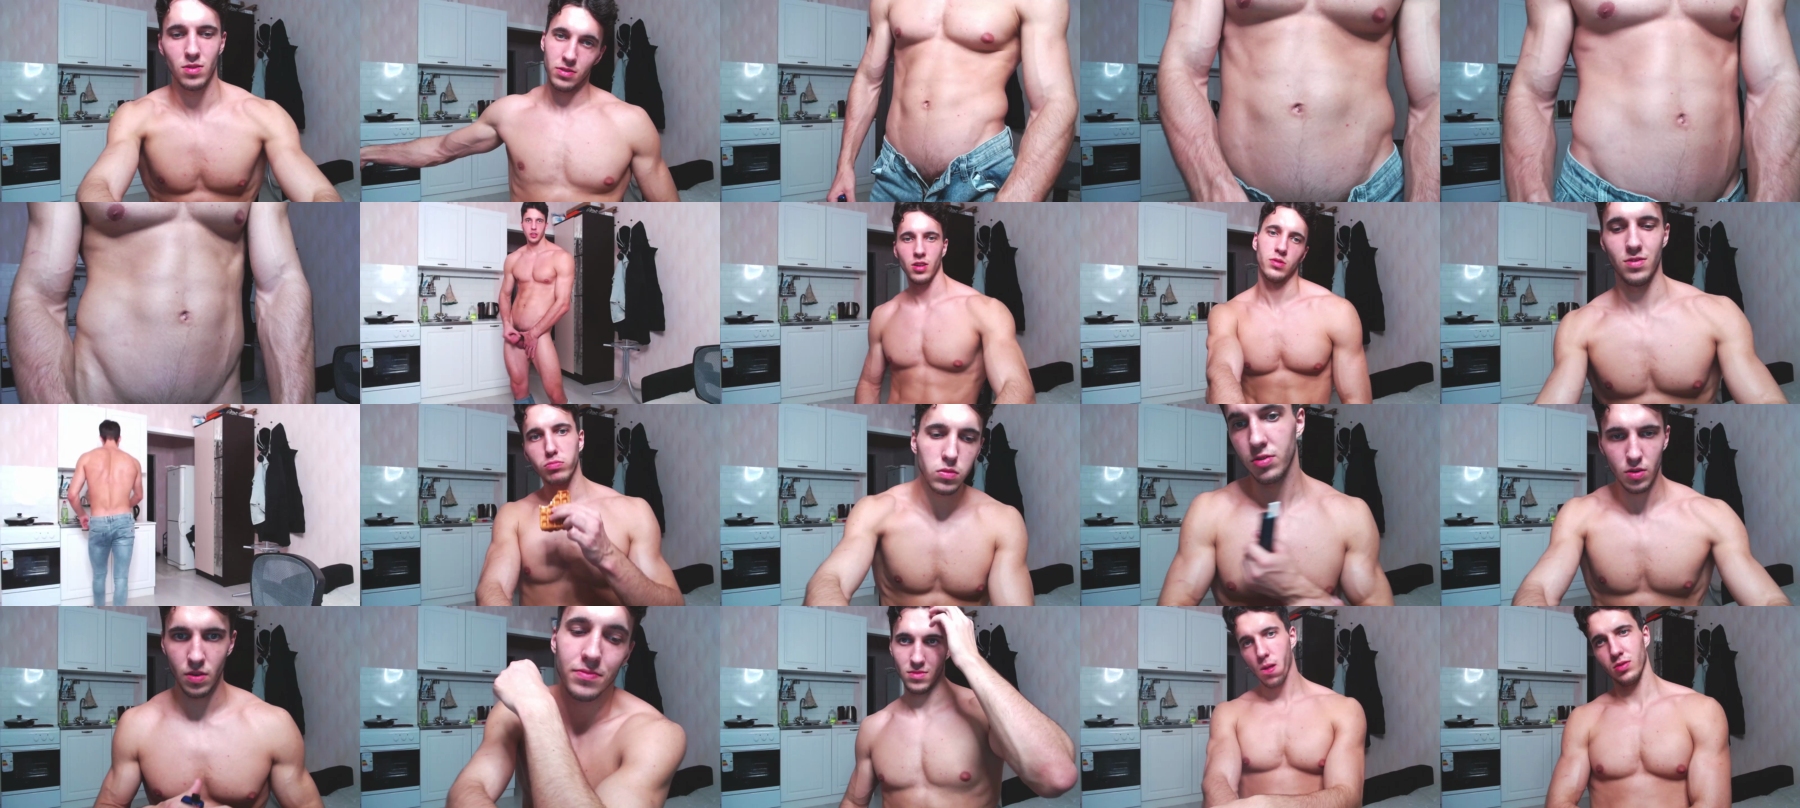 Theodore_Hot  10-10-2021 Male Topless